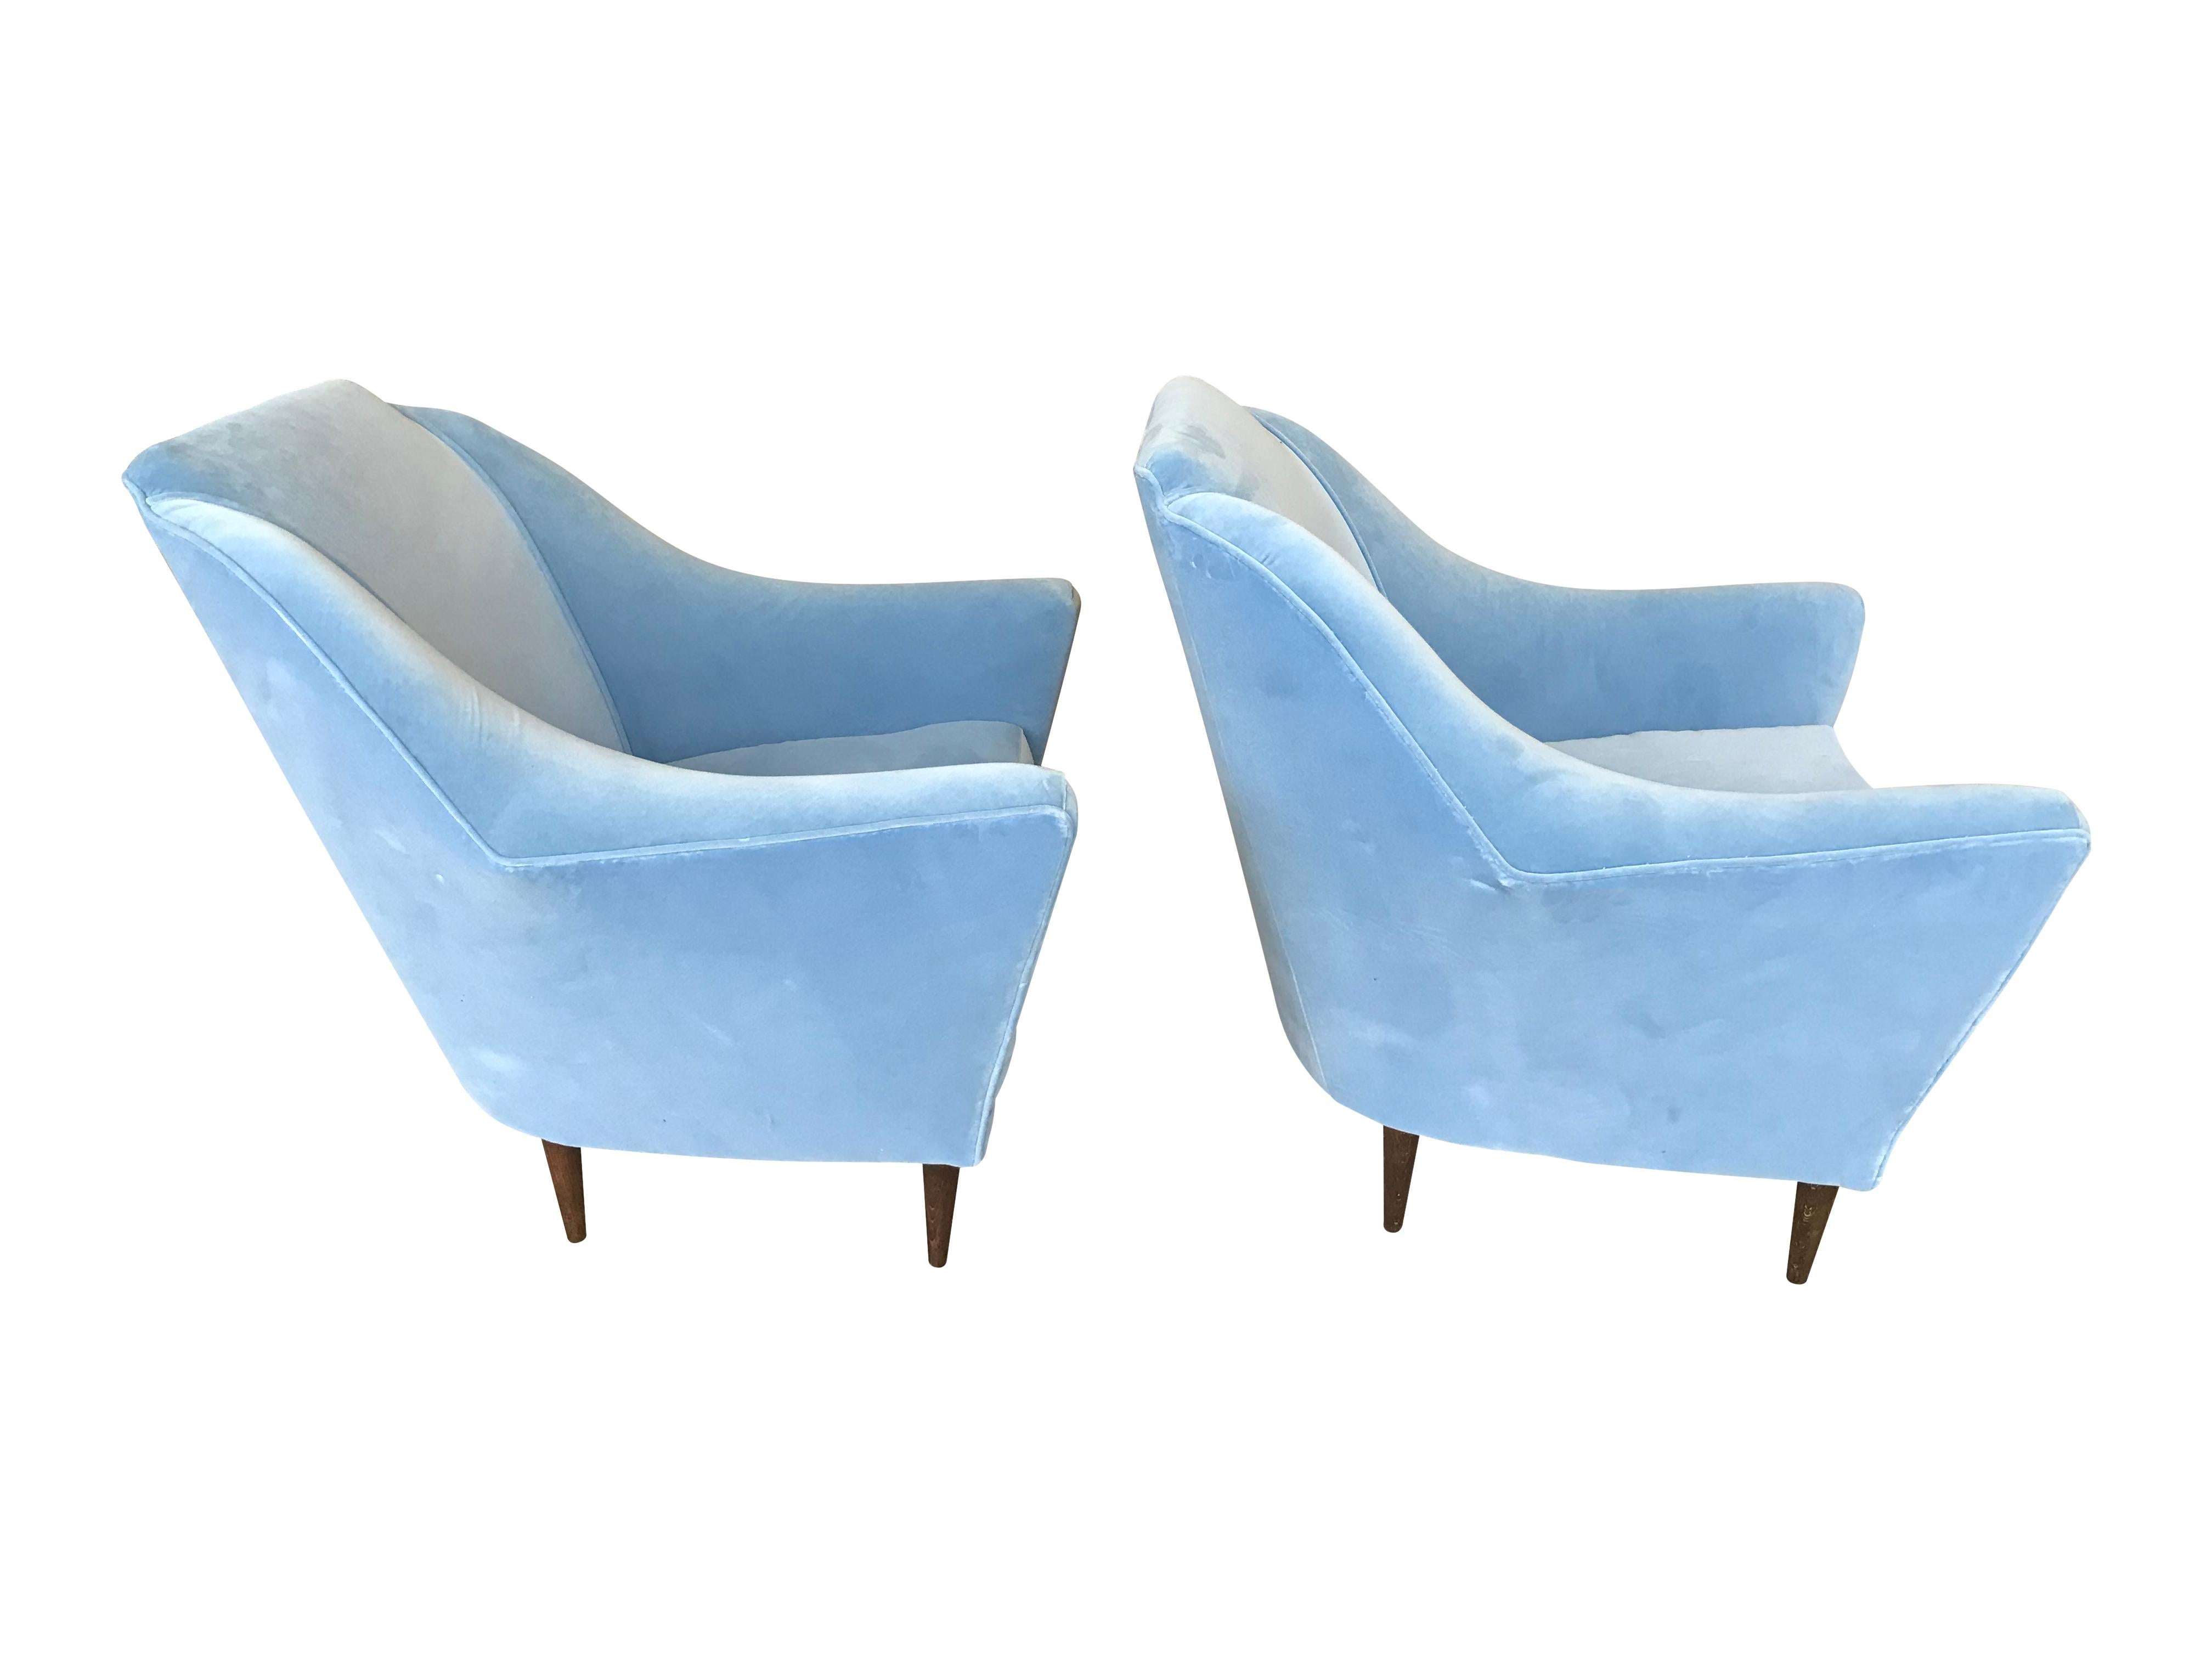 A stunning pair of Ico Parisi armchairs re upholstered in Designers Guild baby blue velvet, with rosewood legs.

Also available is a matching Ico Parisi curved sofa - See other listing under Ed Butcher London storefront. 